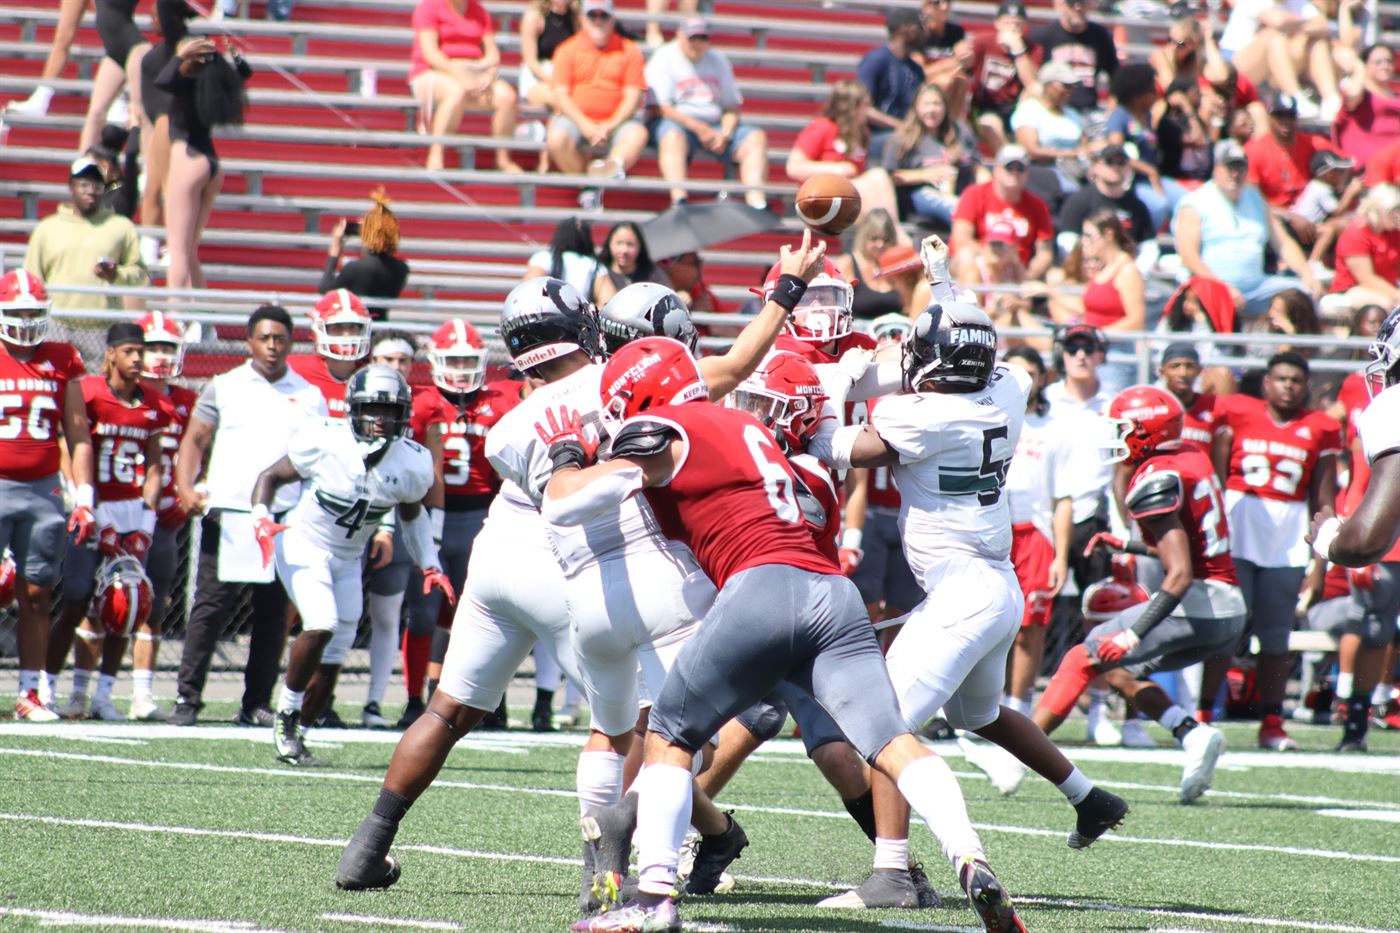 Captain Dimitri Pali had a sack in the game, as the defense looks to be solid early in the season. Trevor Geisberg | The Montclarion